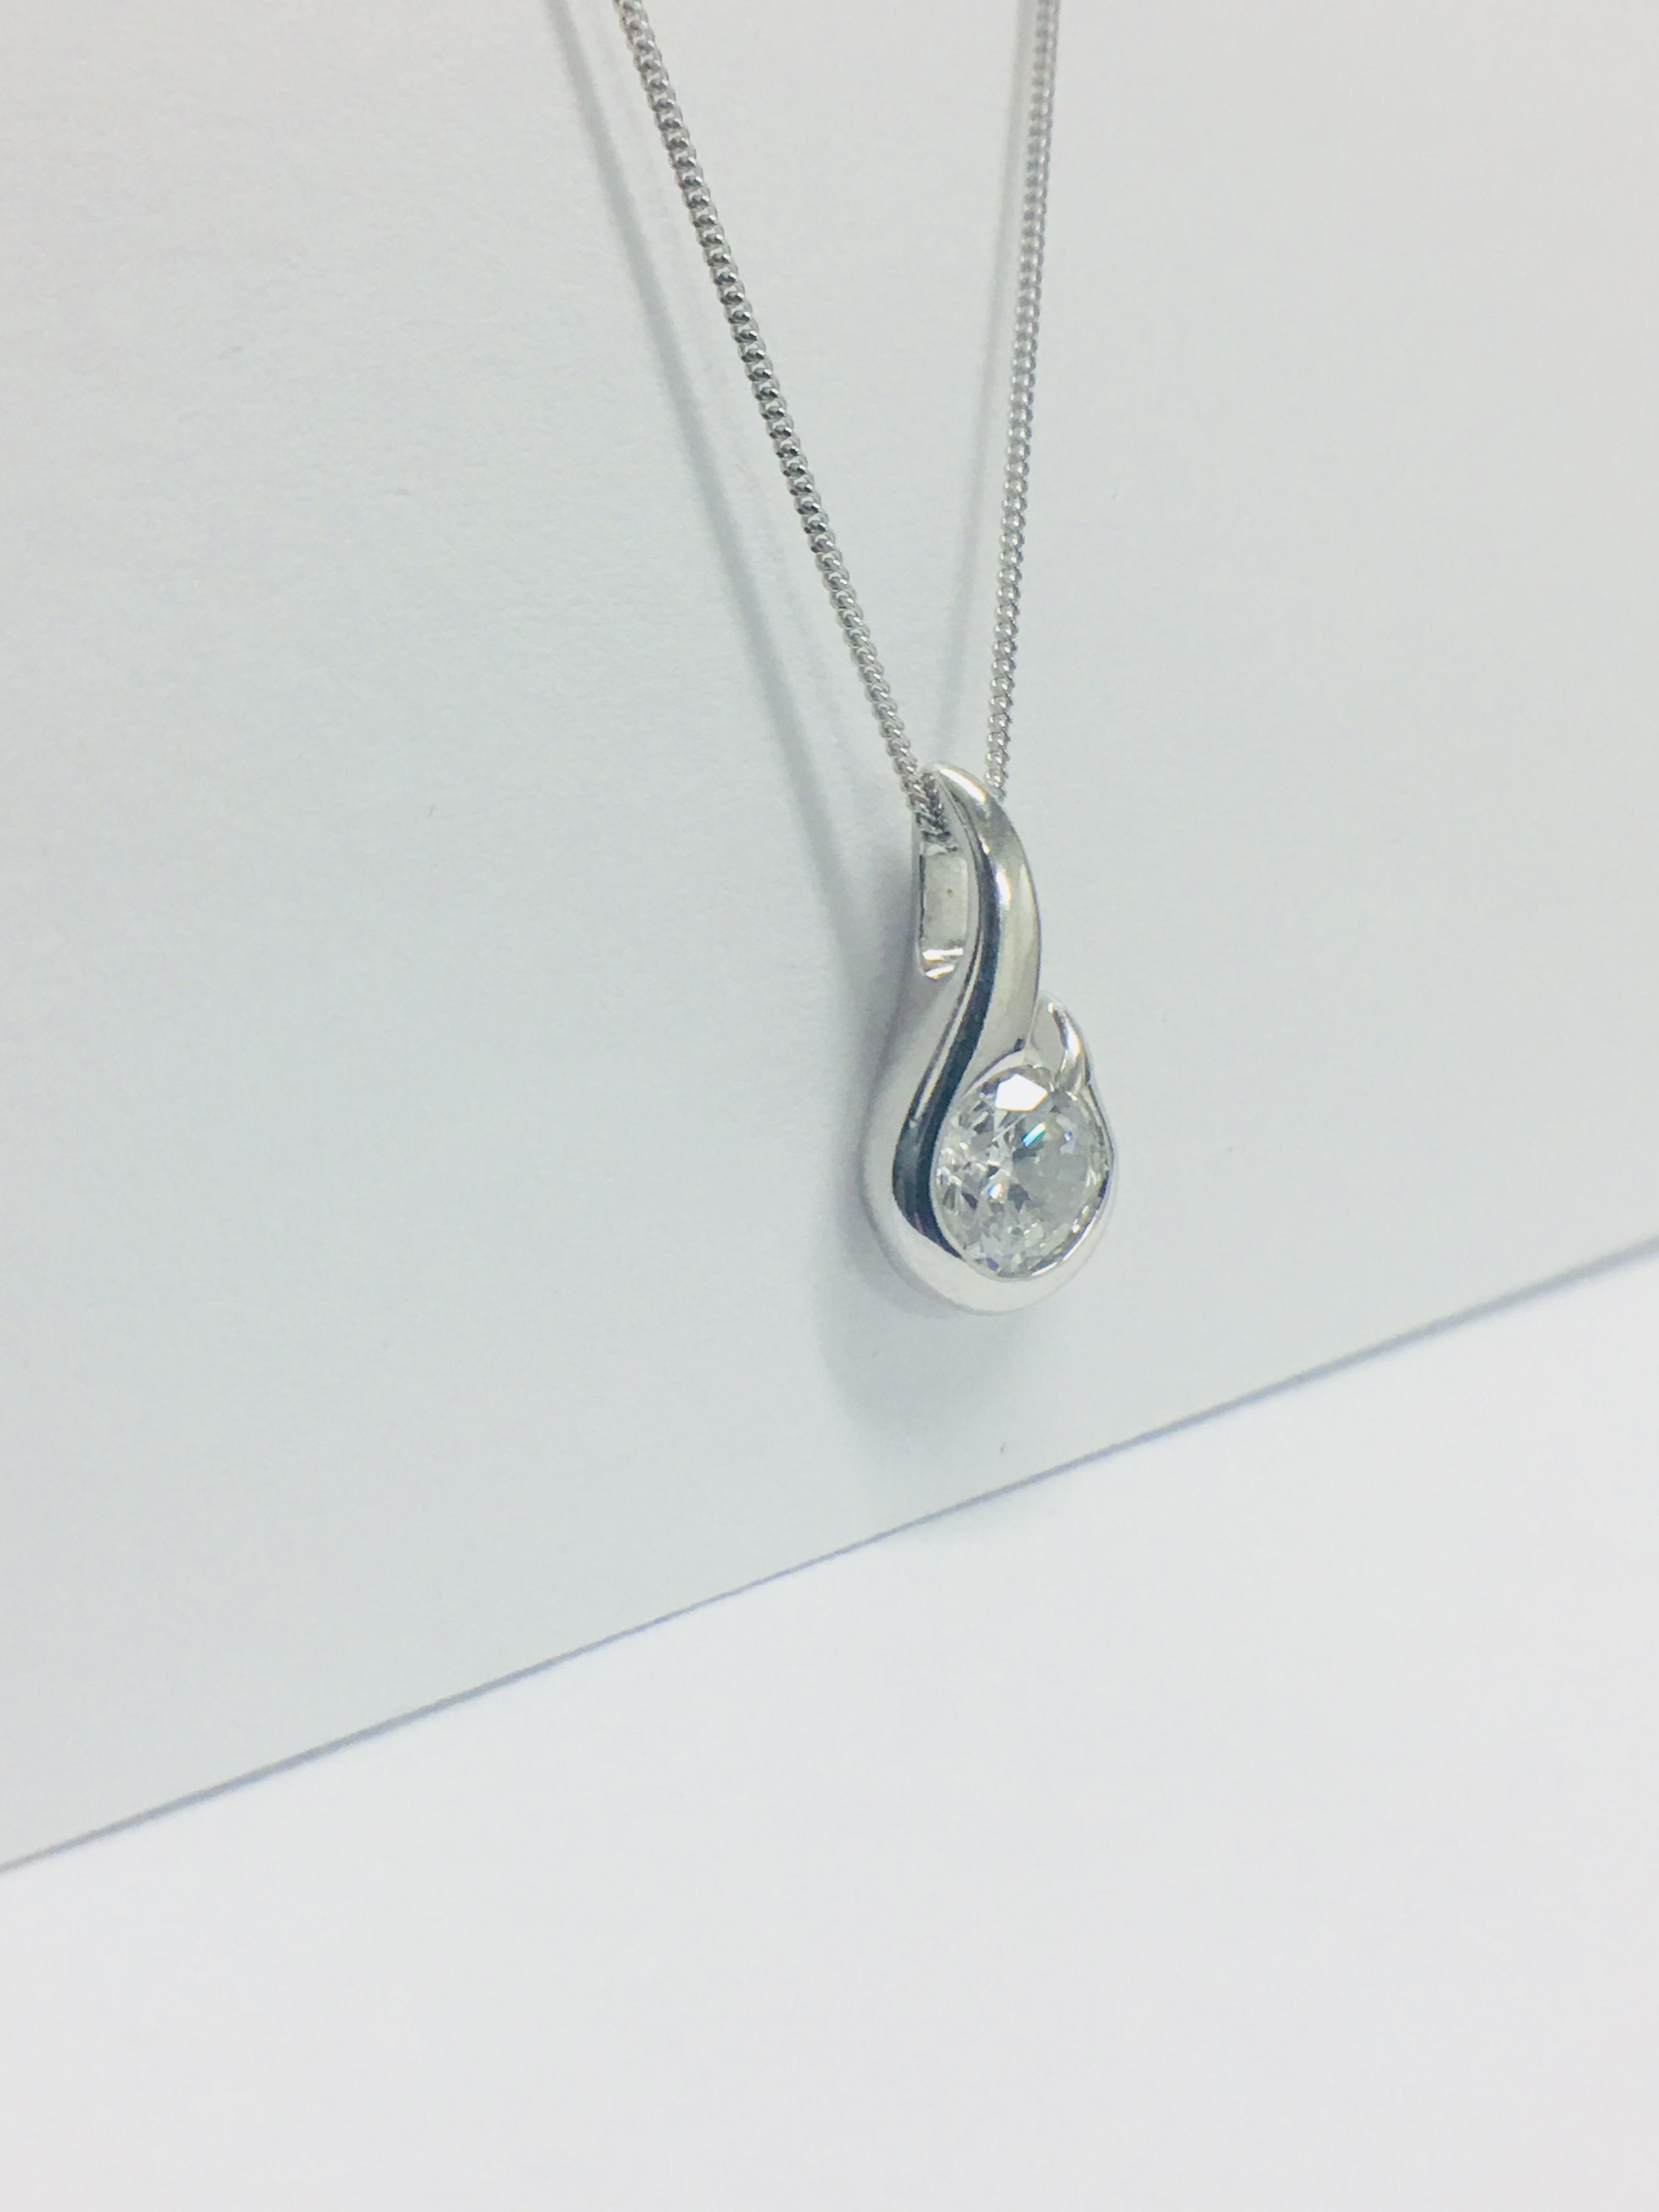 Platinum Diamond Pendant And 9Ct White Gold Necklace, - Image 5 of 5